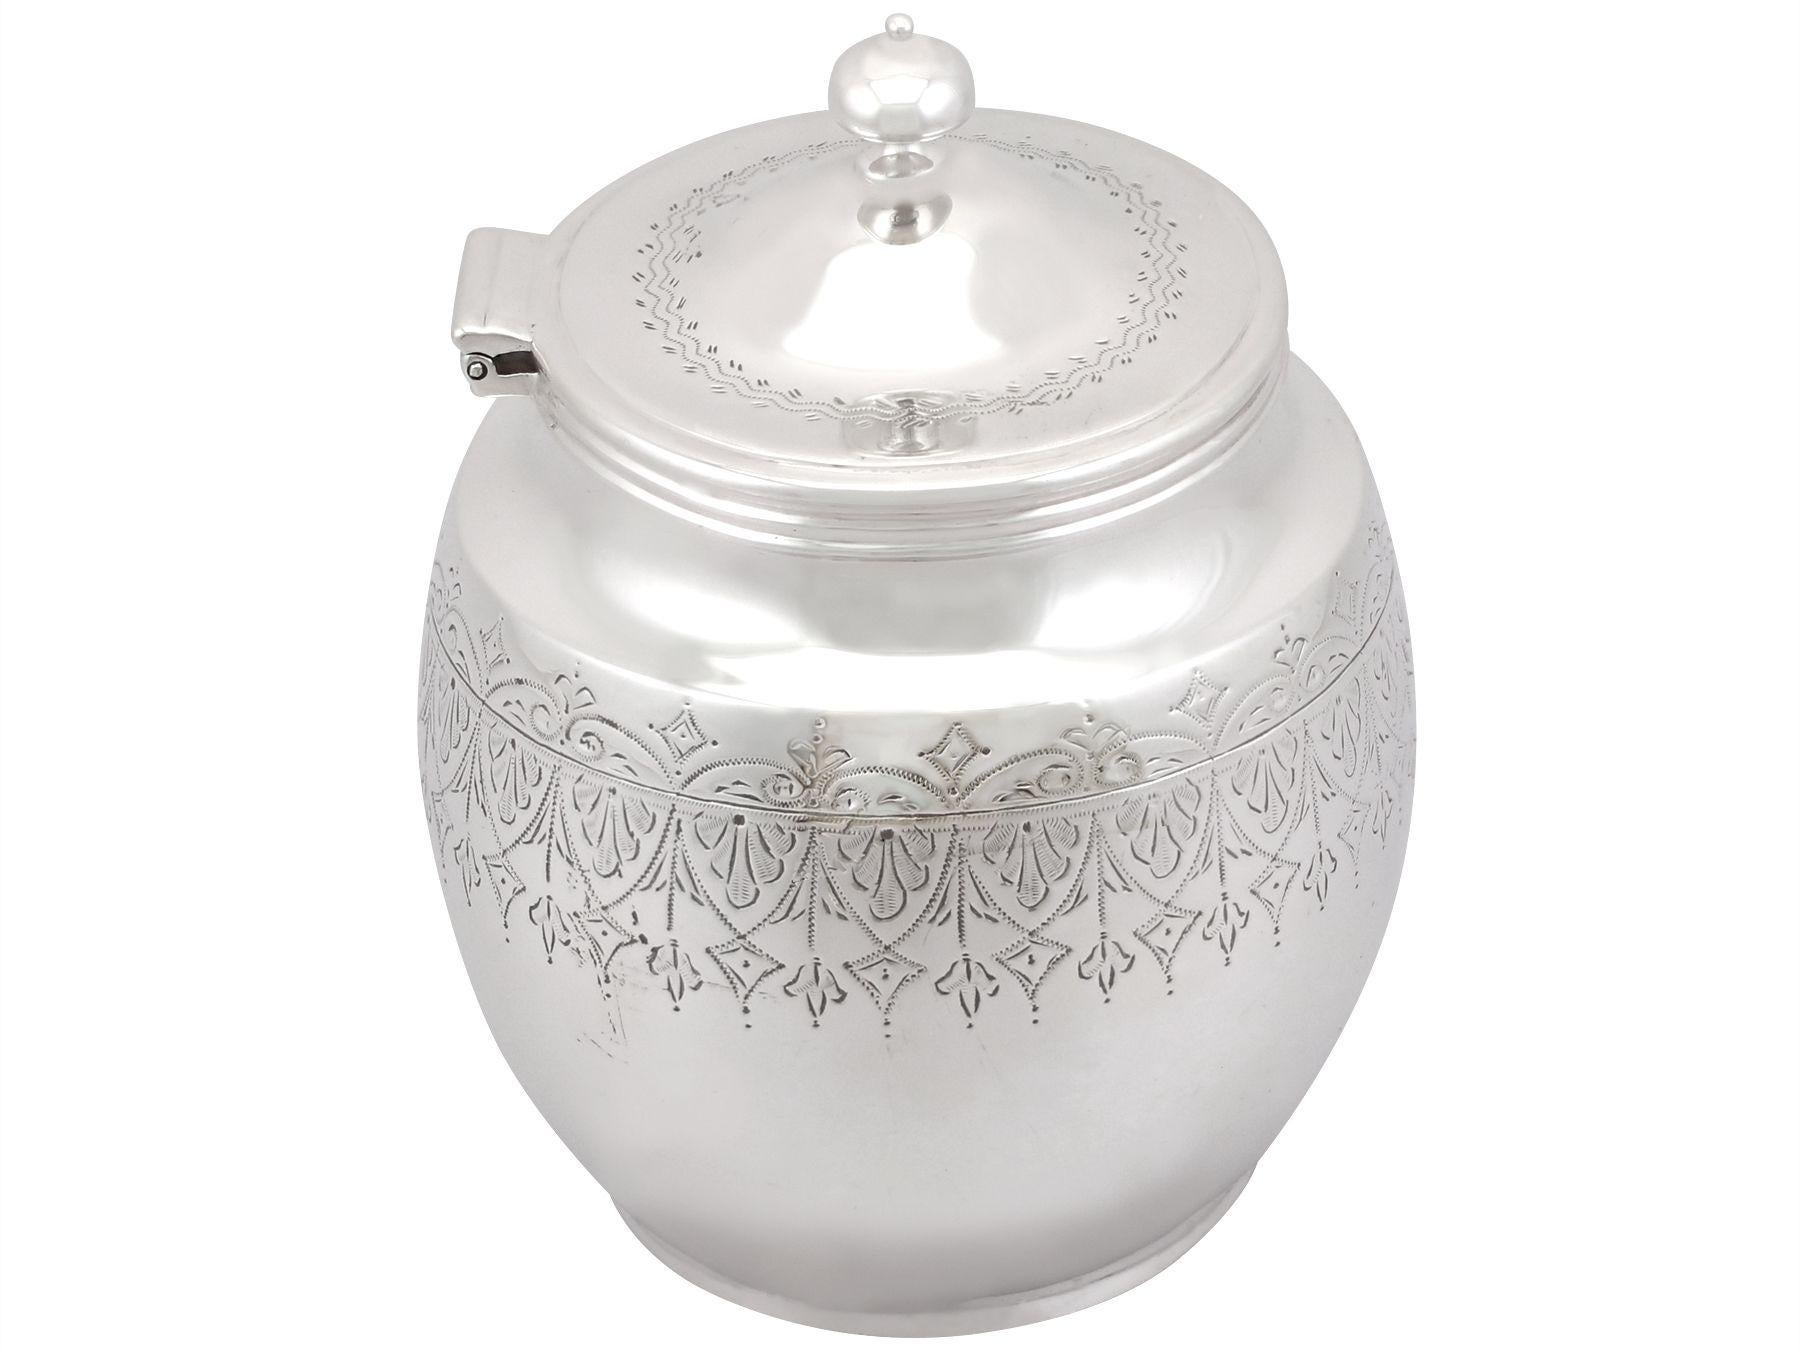 An exceptional, fine and impressive antique George V English sterling silver tea caddy; an addition to our silverware collection

This exceptional antique George V sterling silver tea caddy has an oval rounded form.

The surface of this